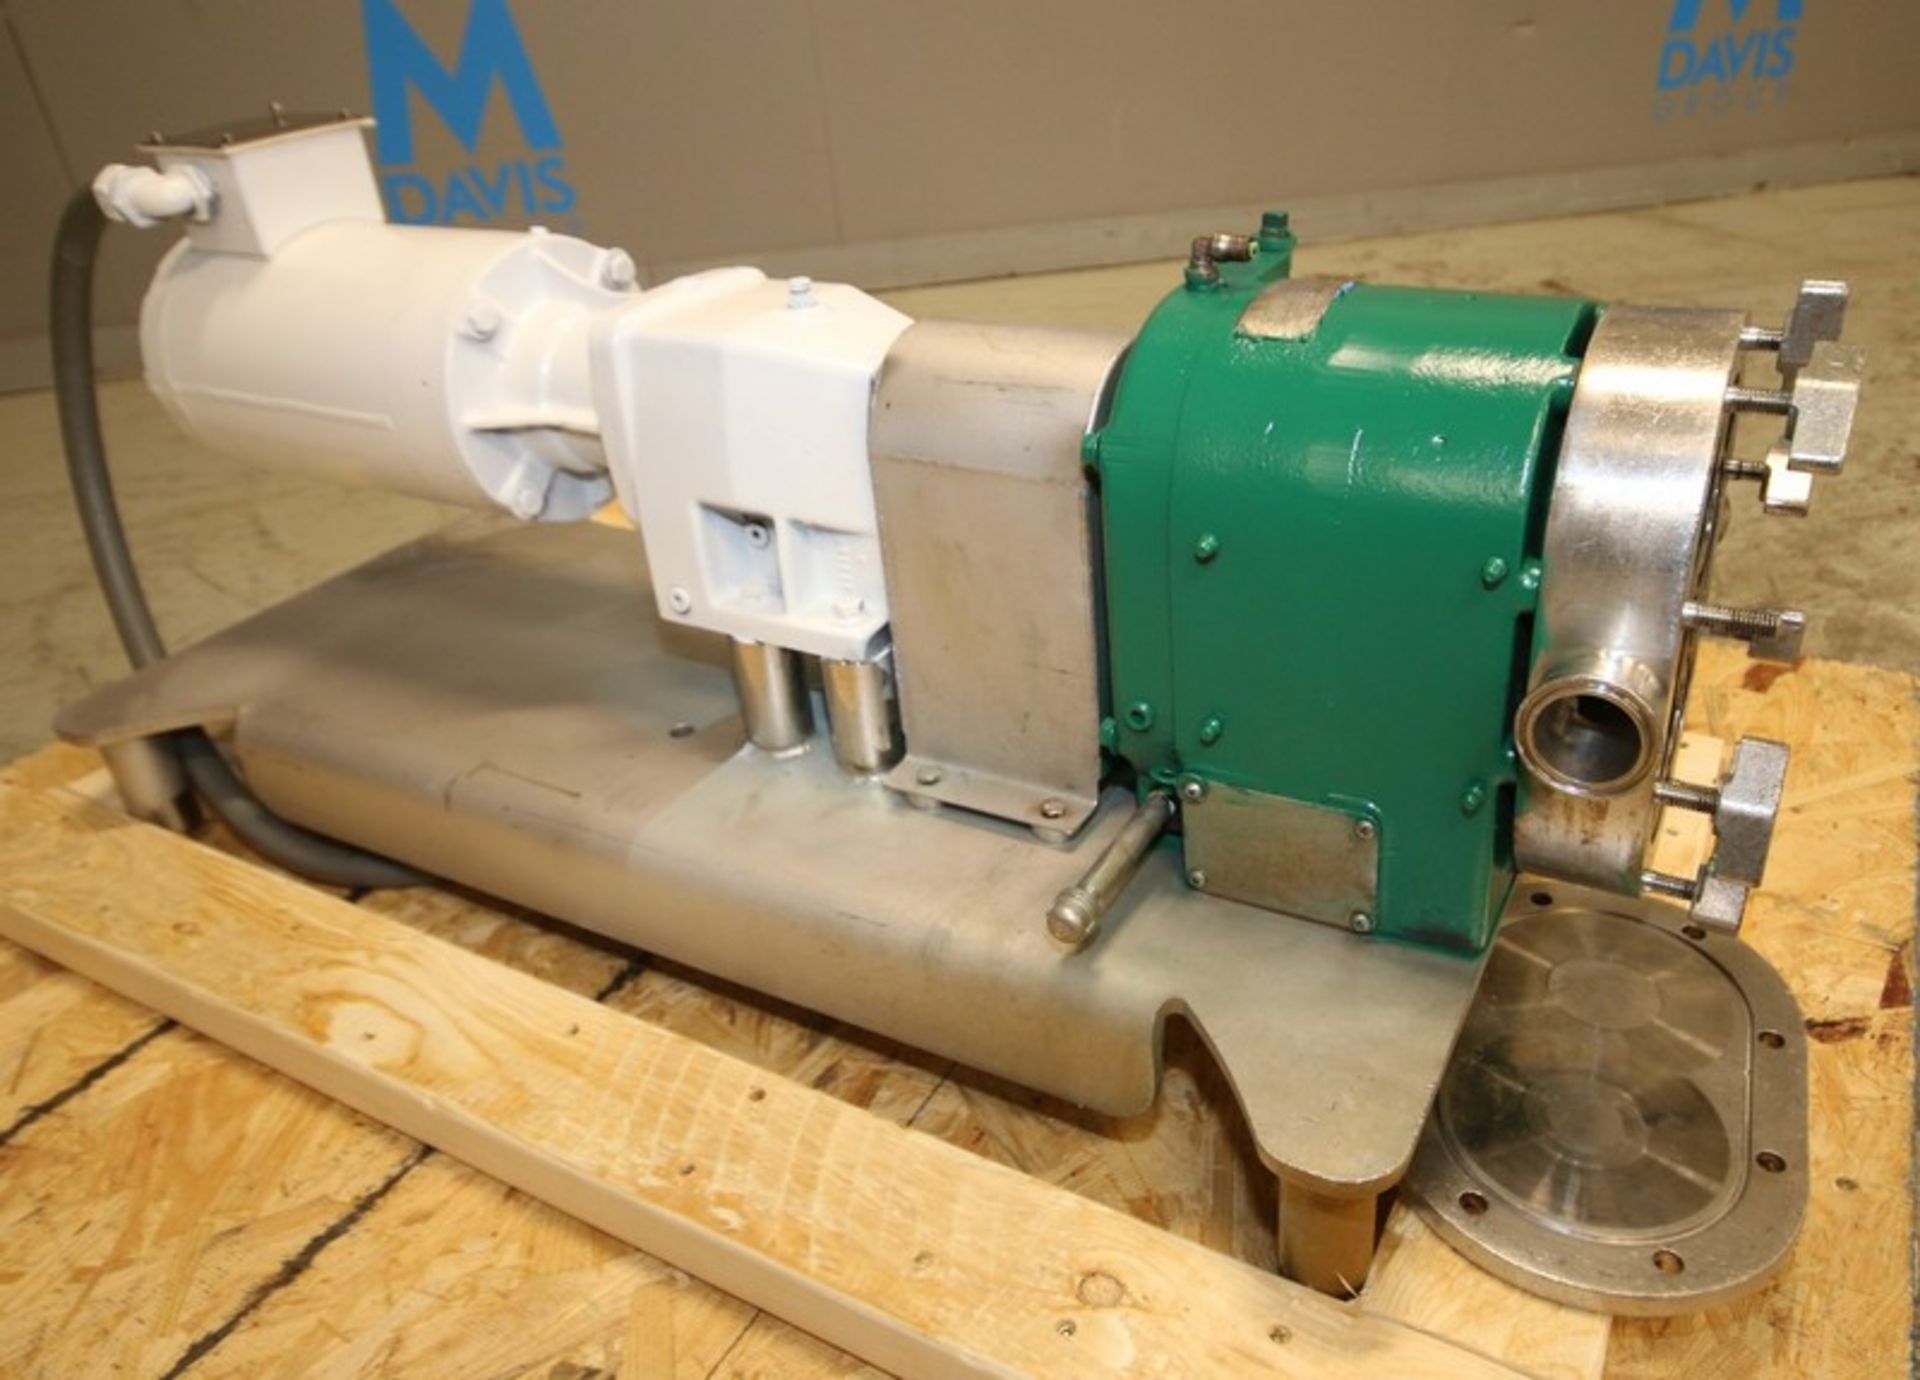 Tri Clover Positive Displacement Pump, Model PR25-1 1/2M-UC4-ST-S, S/N X3883, with 1 1/2" CT Head - Image 5 of 10